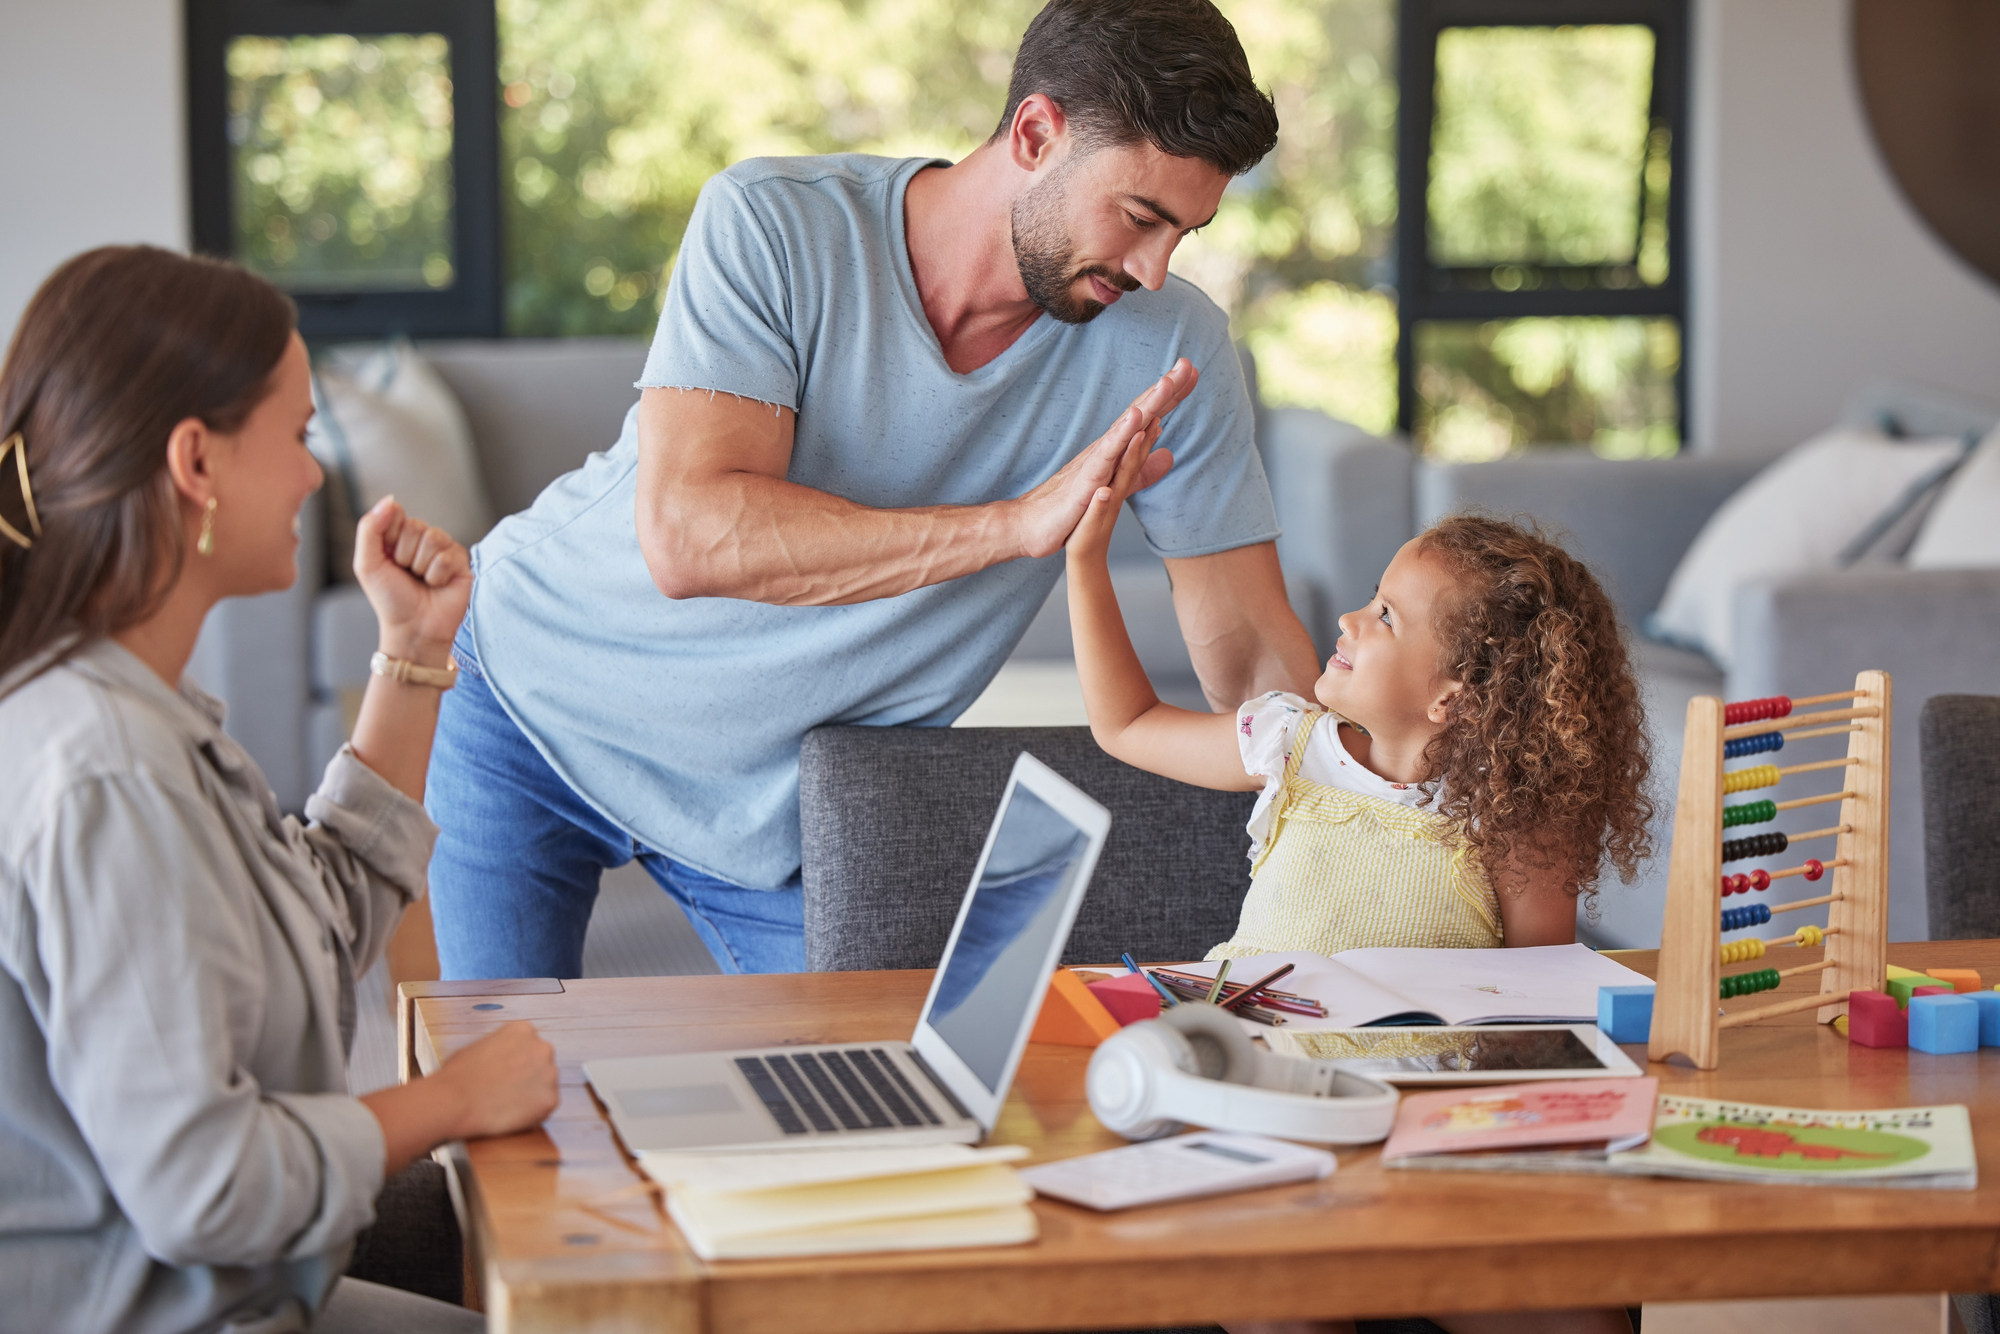 High five, family and education with a student girl learning and studying at home while her parents remote work from home. Study, school and support with a father giving motivation to his daughter.